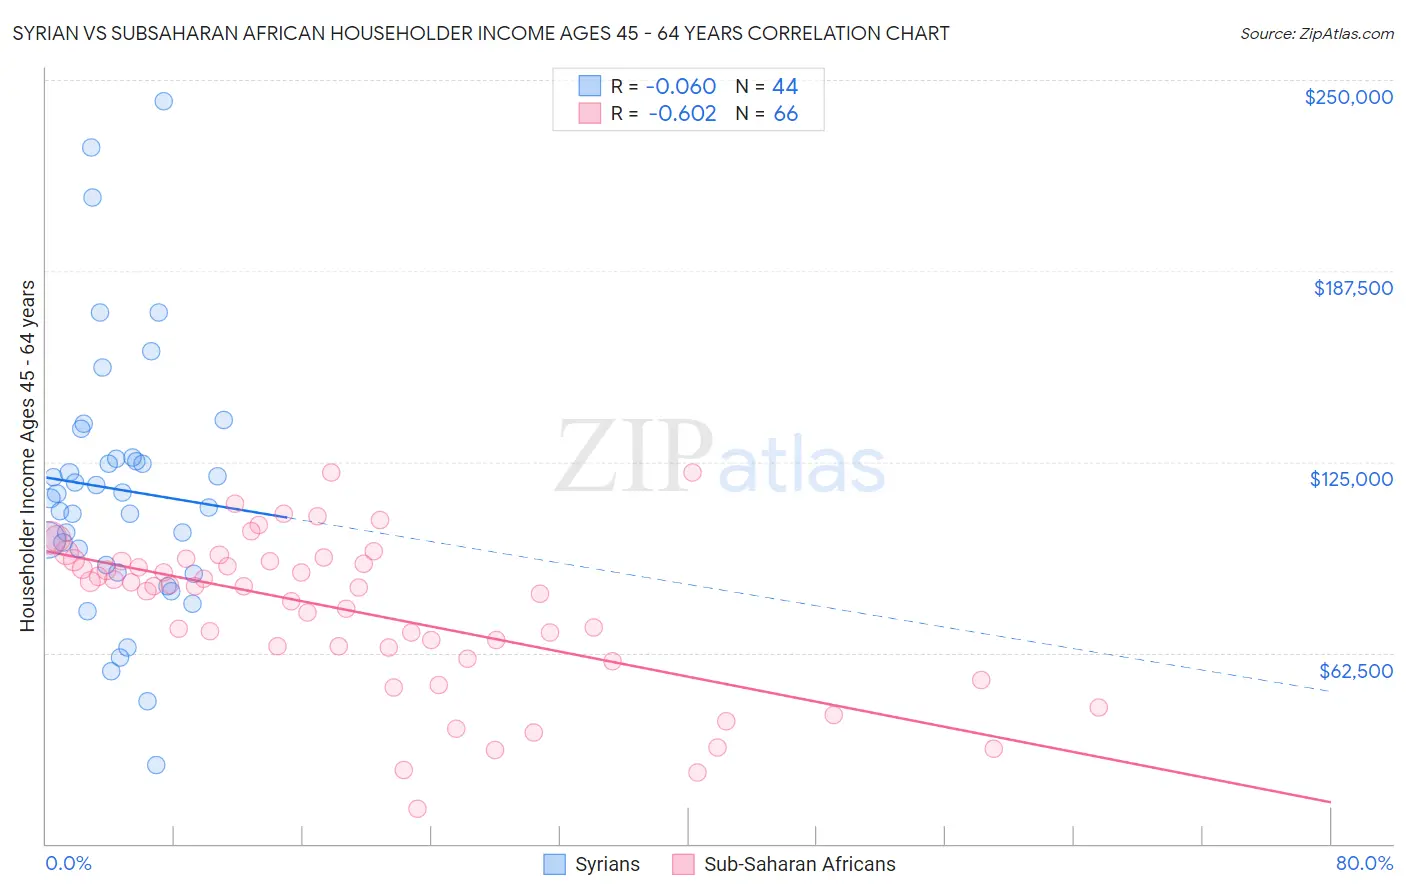 Syrian vs Subsaharan African Householder Income Ages 45 - 64 years